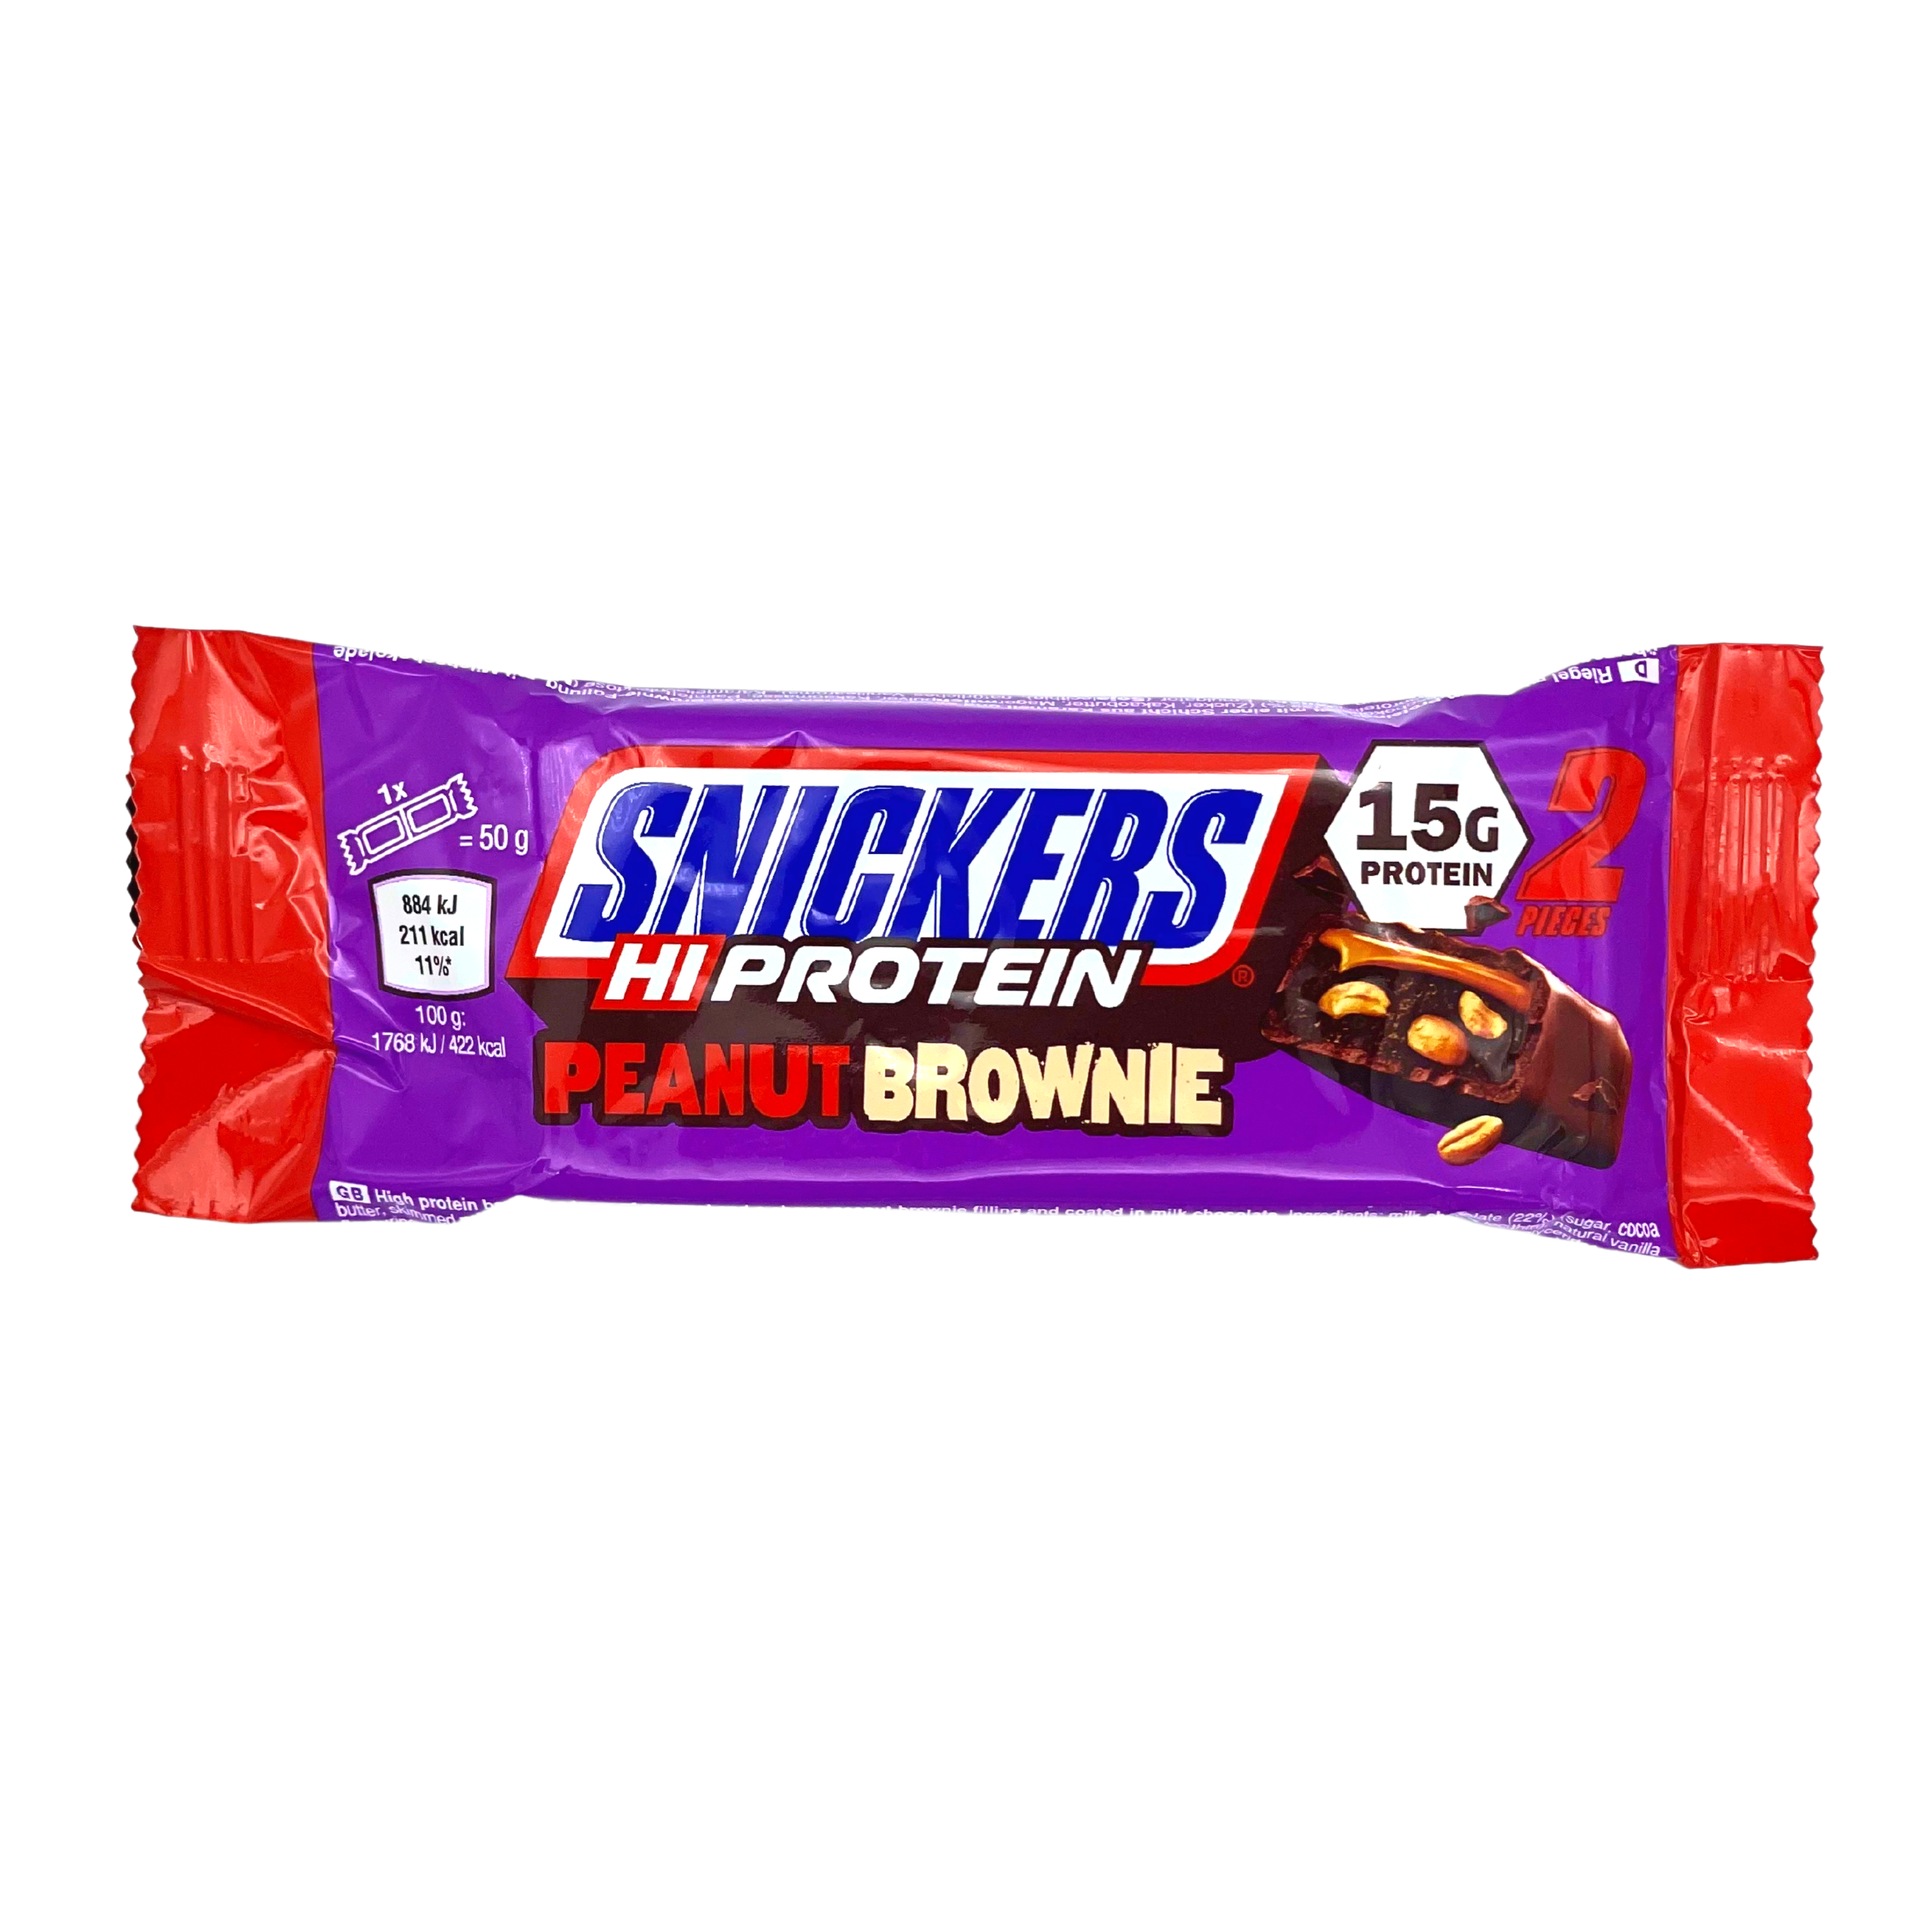 HiProtein - Snickers Peanut Brownie 50g